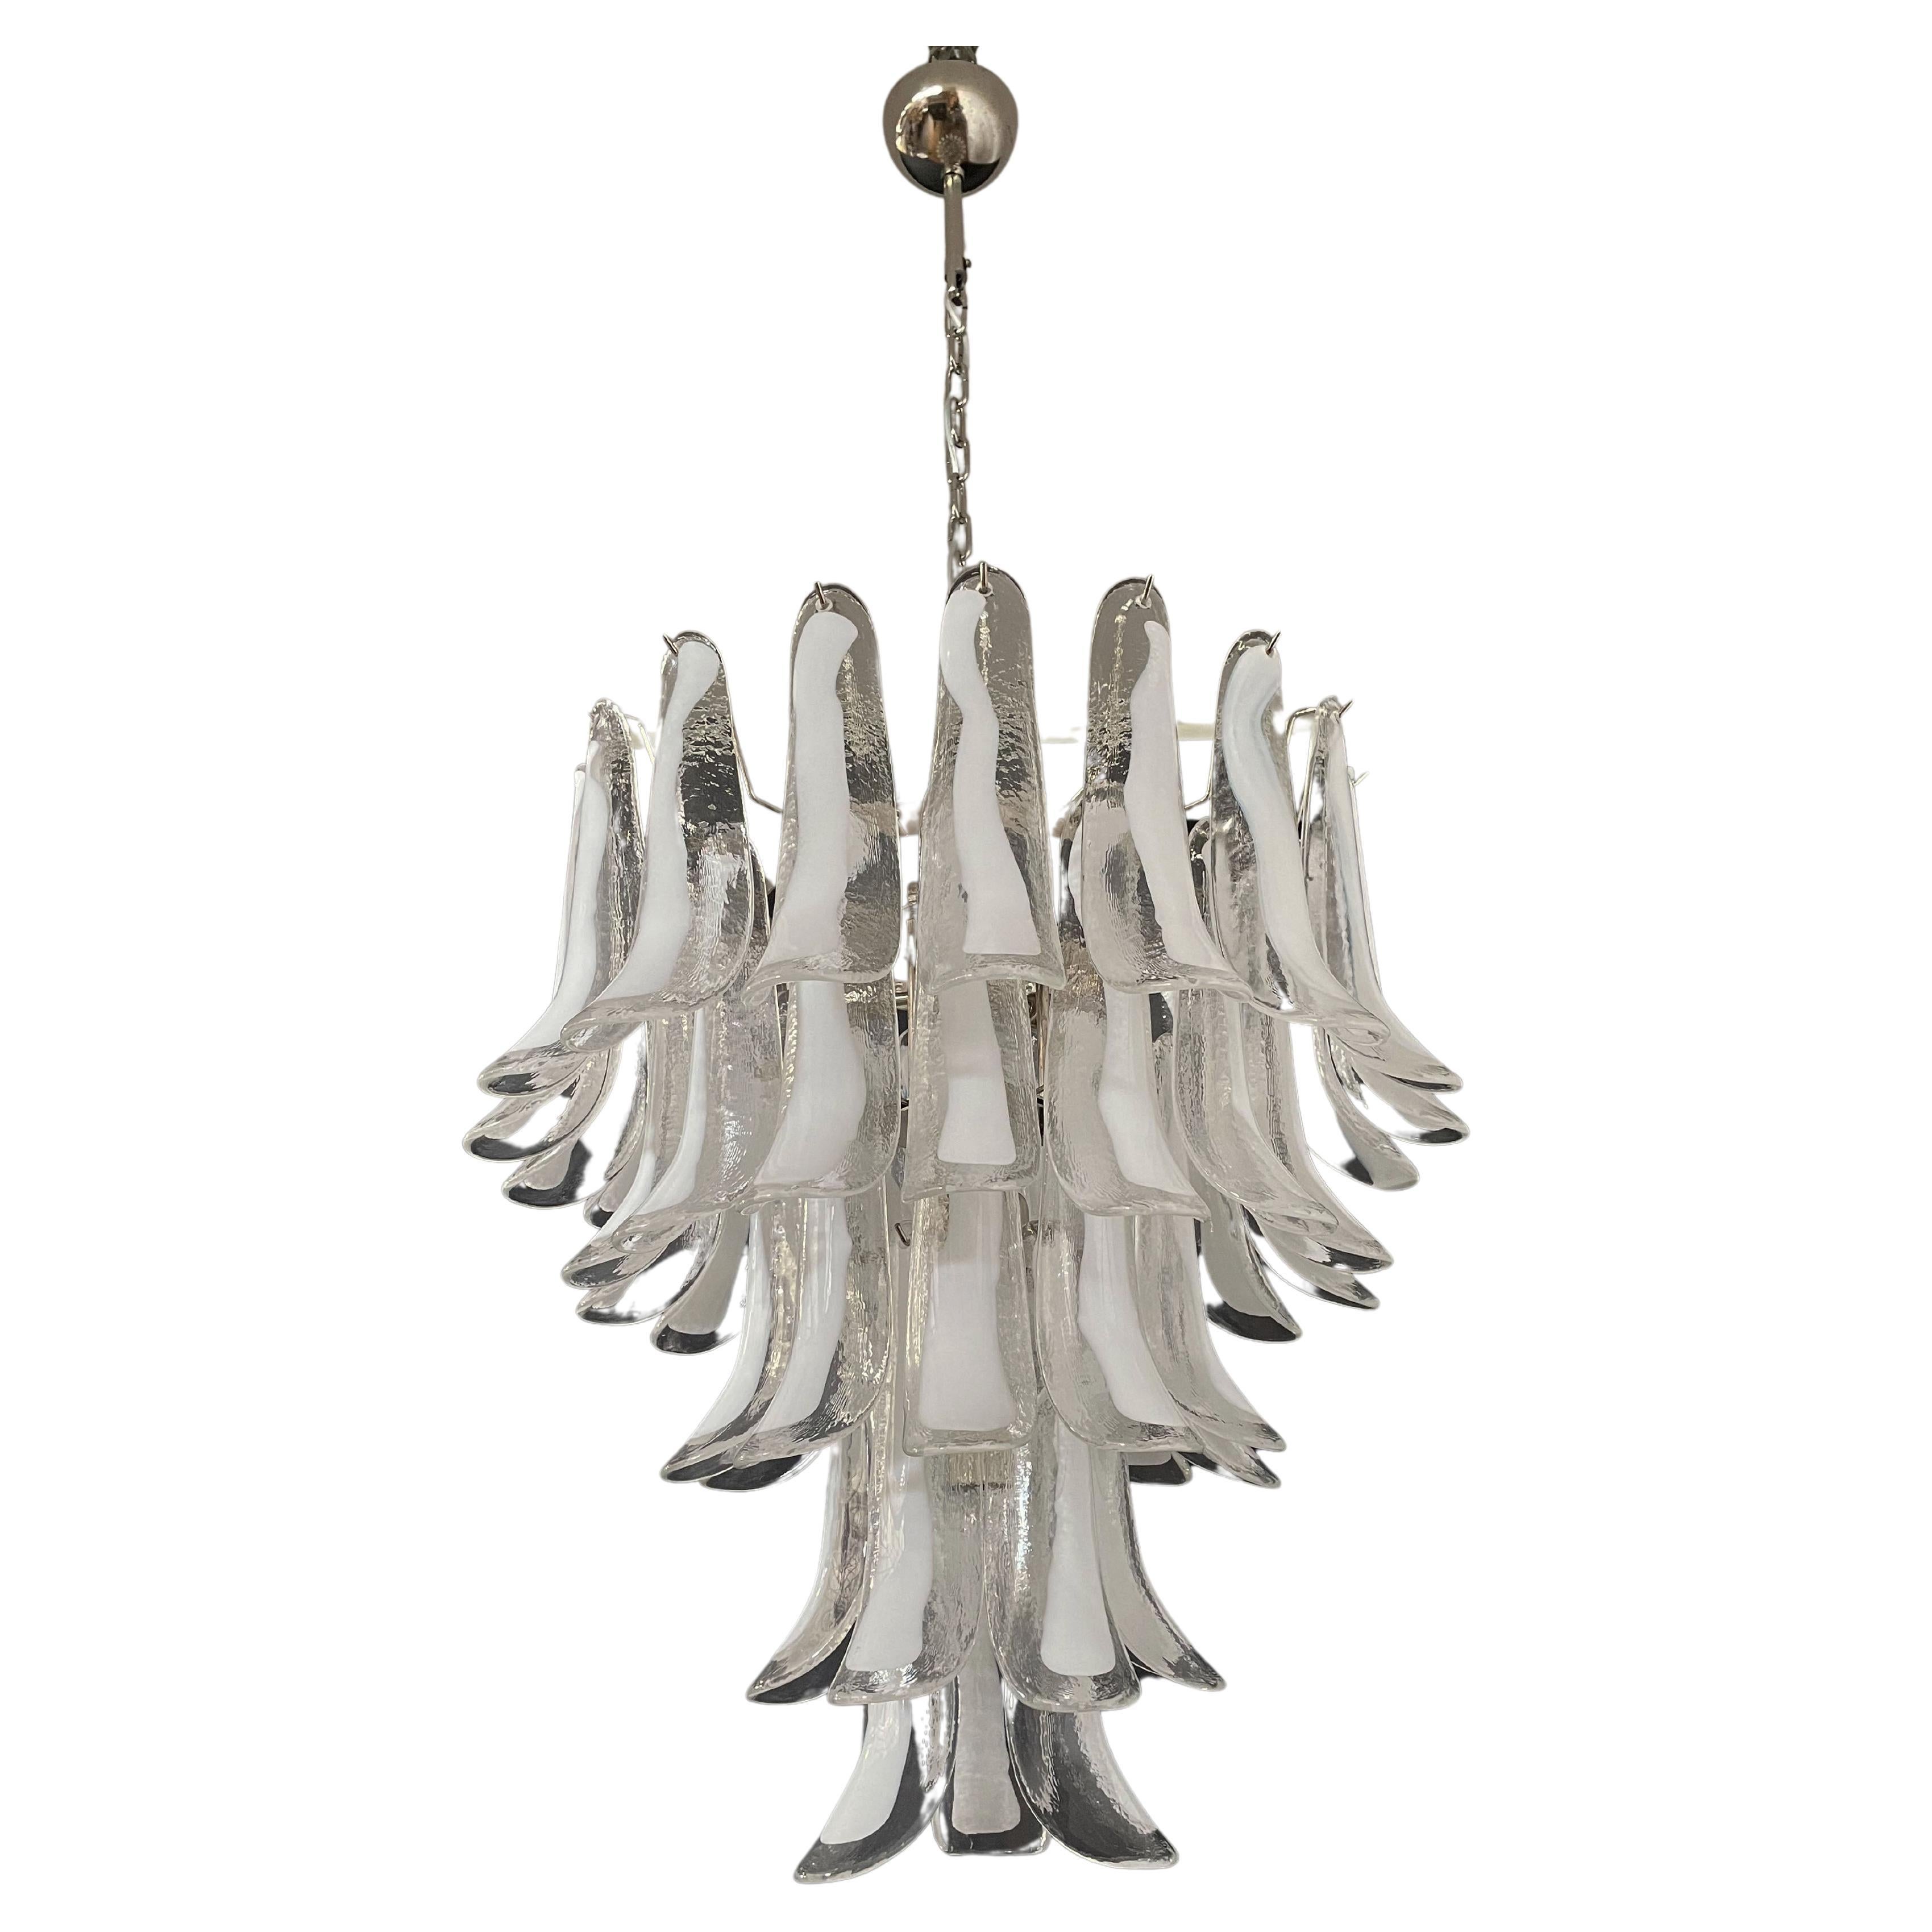 Italian vintage Murano chandelier in the manner of Mazzega - 52 glass petals For Sale